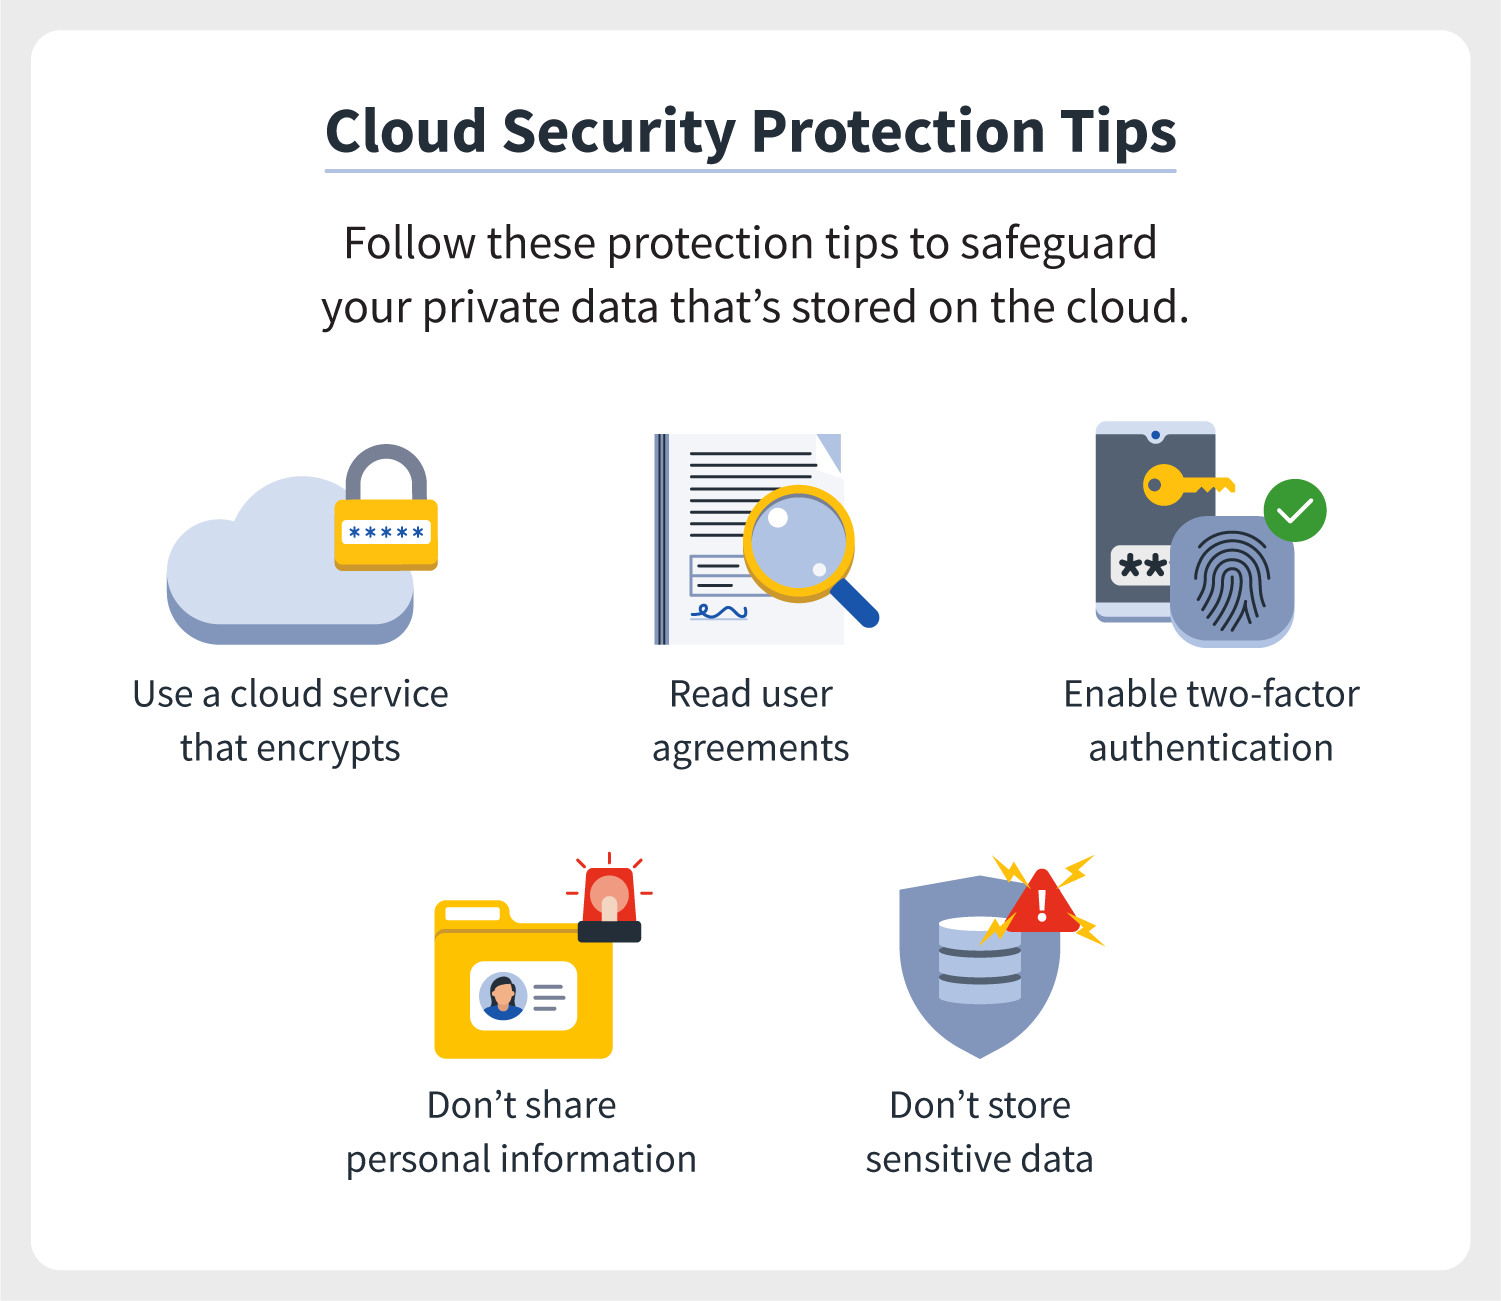 Five illustrations accompany cloud security protection tips that can help safeguard personal data from the cloud security risks threatening us today. 